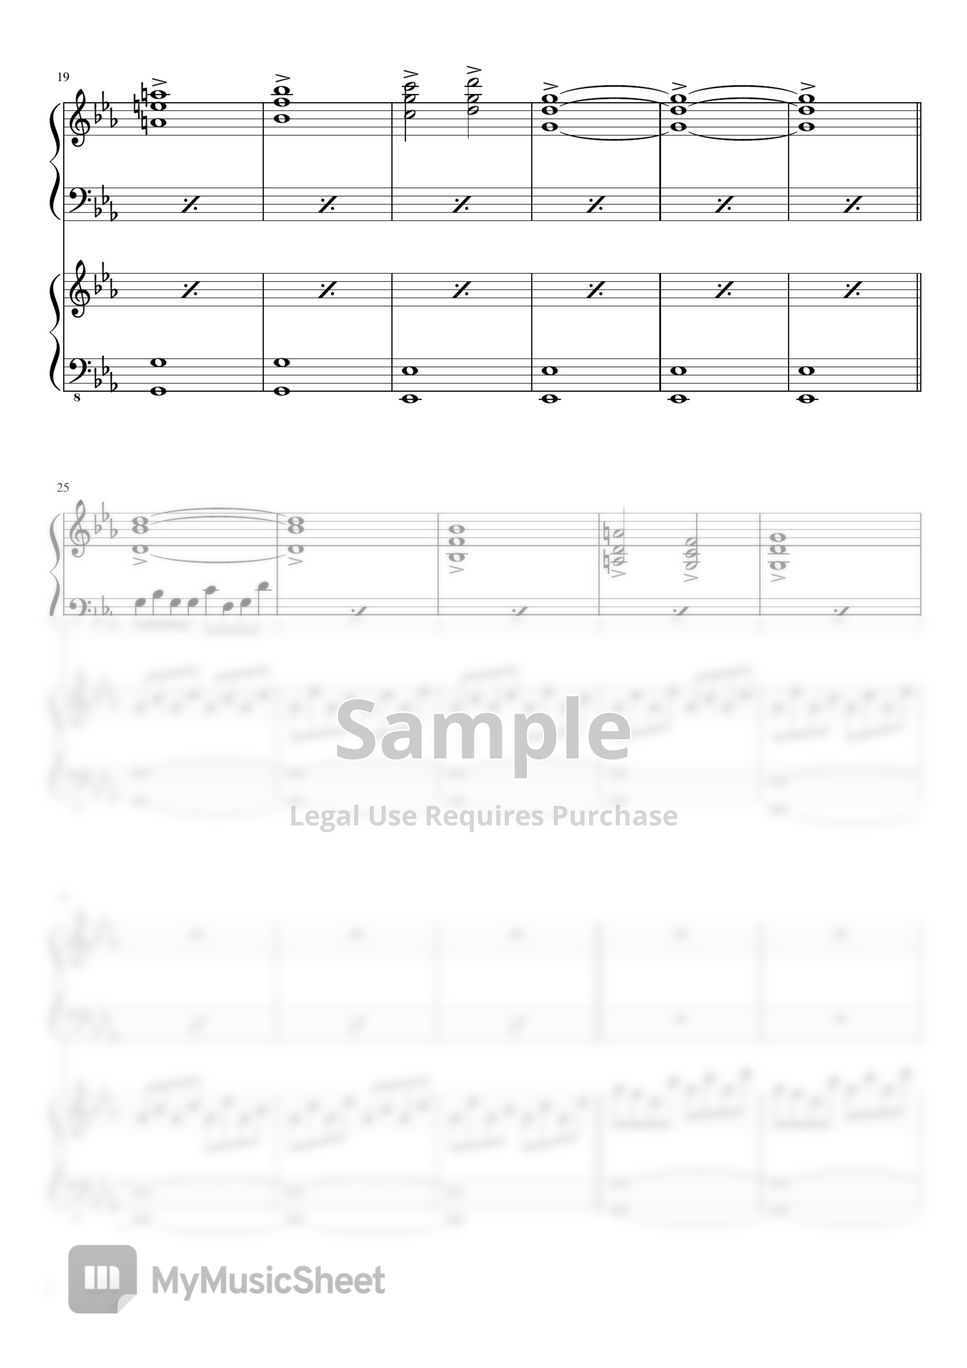 Mass Effect Uncharted Worlds Partitura By Torby Brand